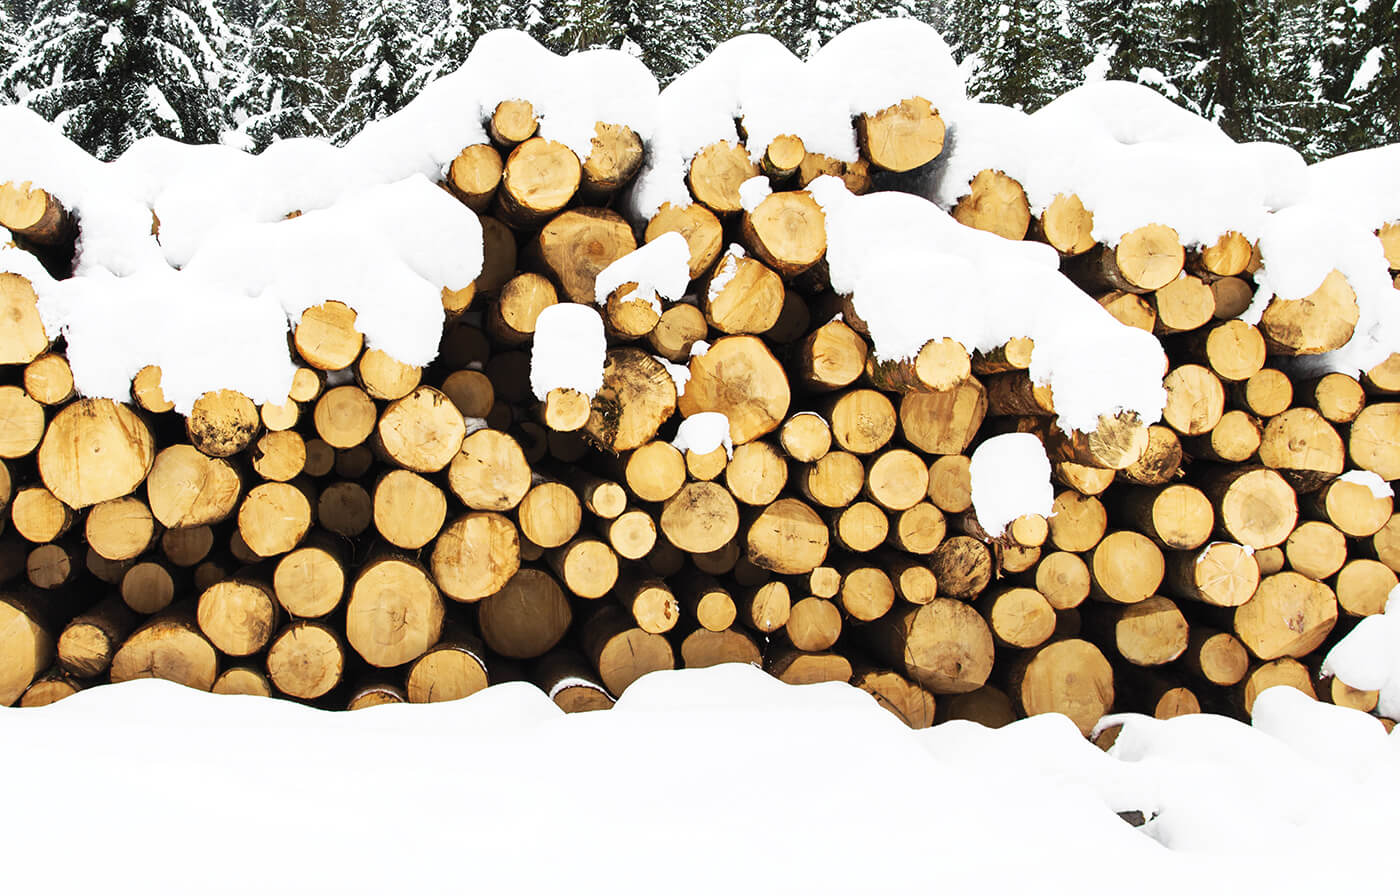 Tree logs stacked in a woodpile blanketed by snow.